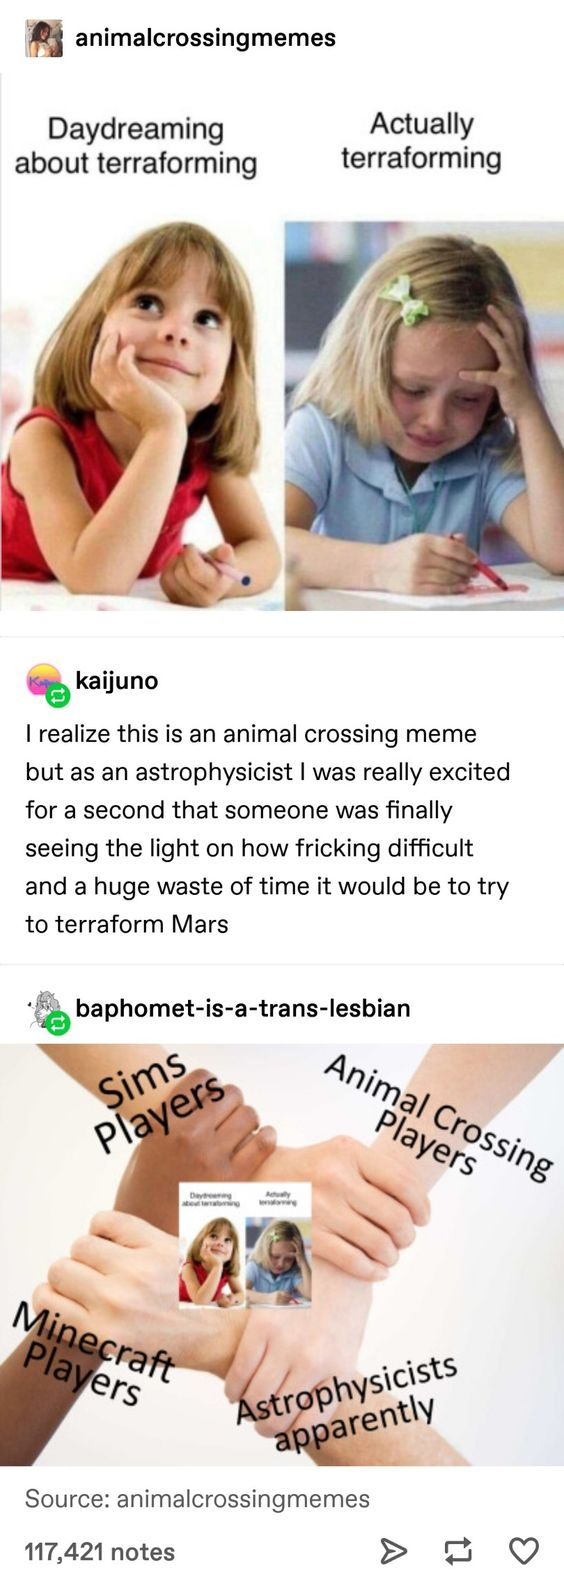 thinking about terraforming meme - animalcrossingmemes Daydreaming about terraforming Actually terraforming kaljuno I realize this is an animal Crossing meme but as an astrophysicist I was really excited for a second that someone was finally seeing the li